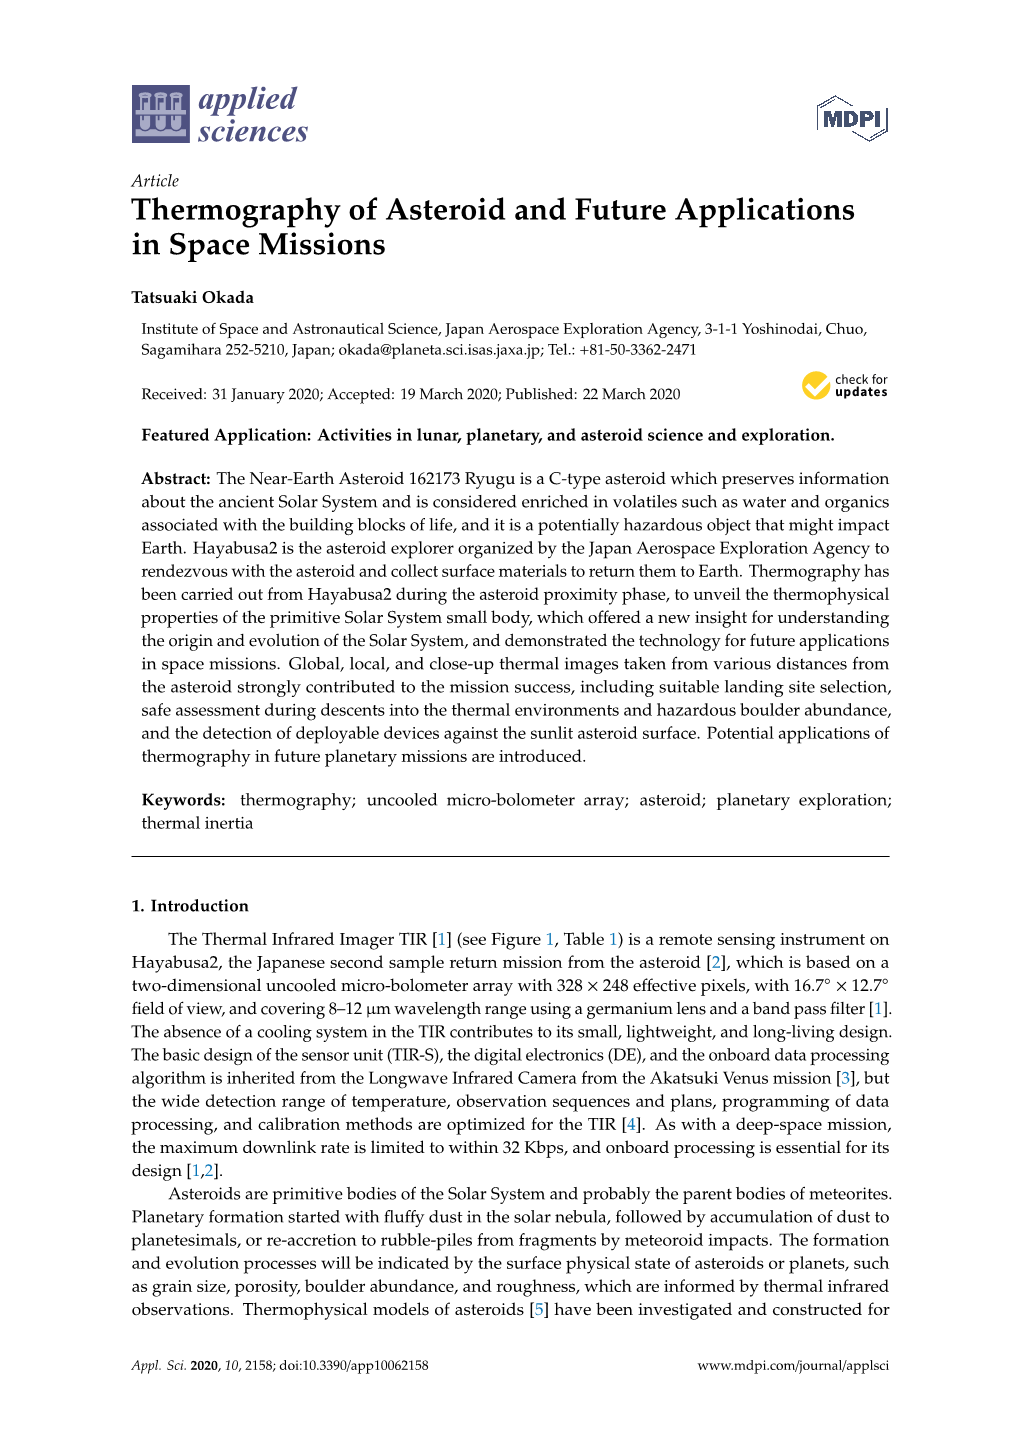 Thermography of Asteroid and Future Applications in Space Missions